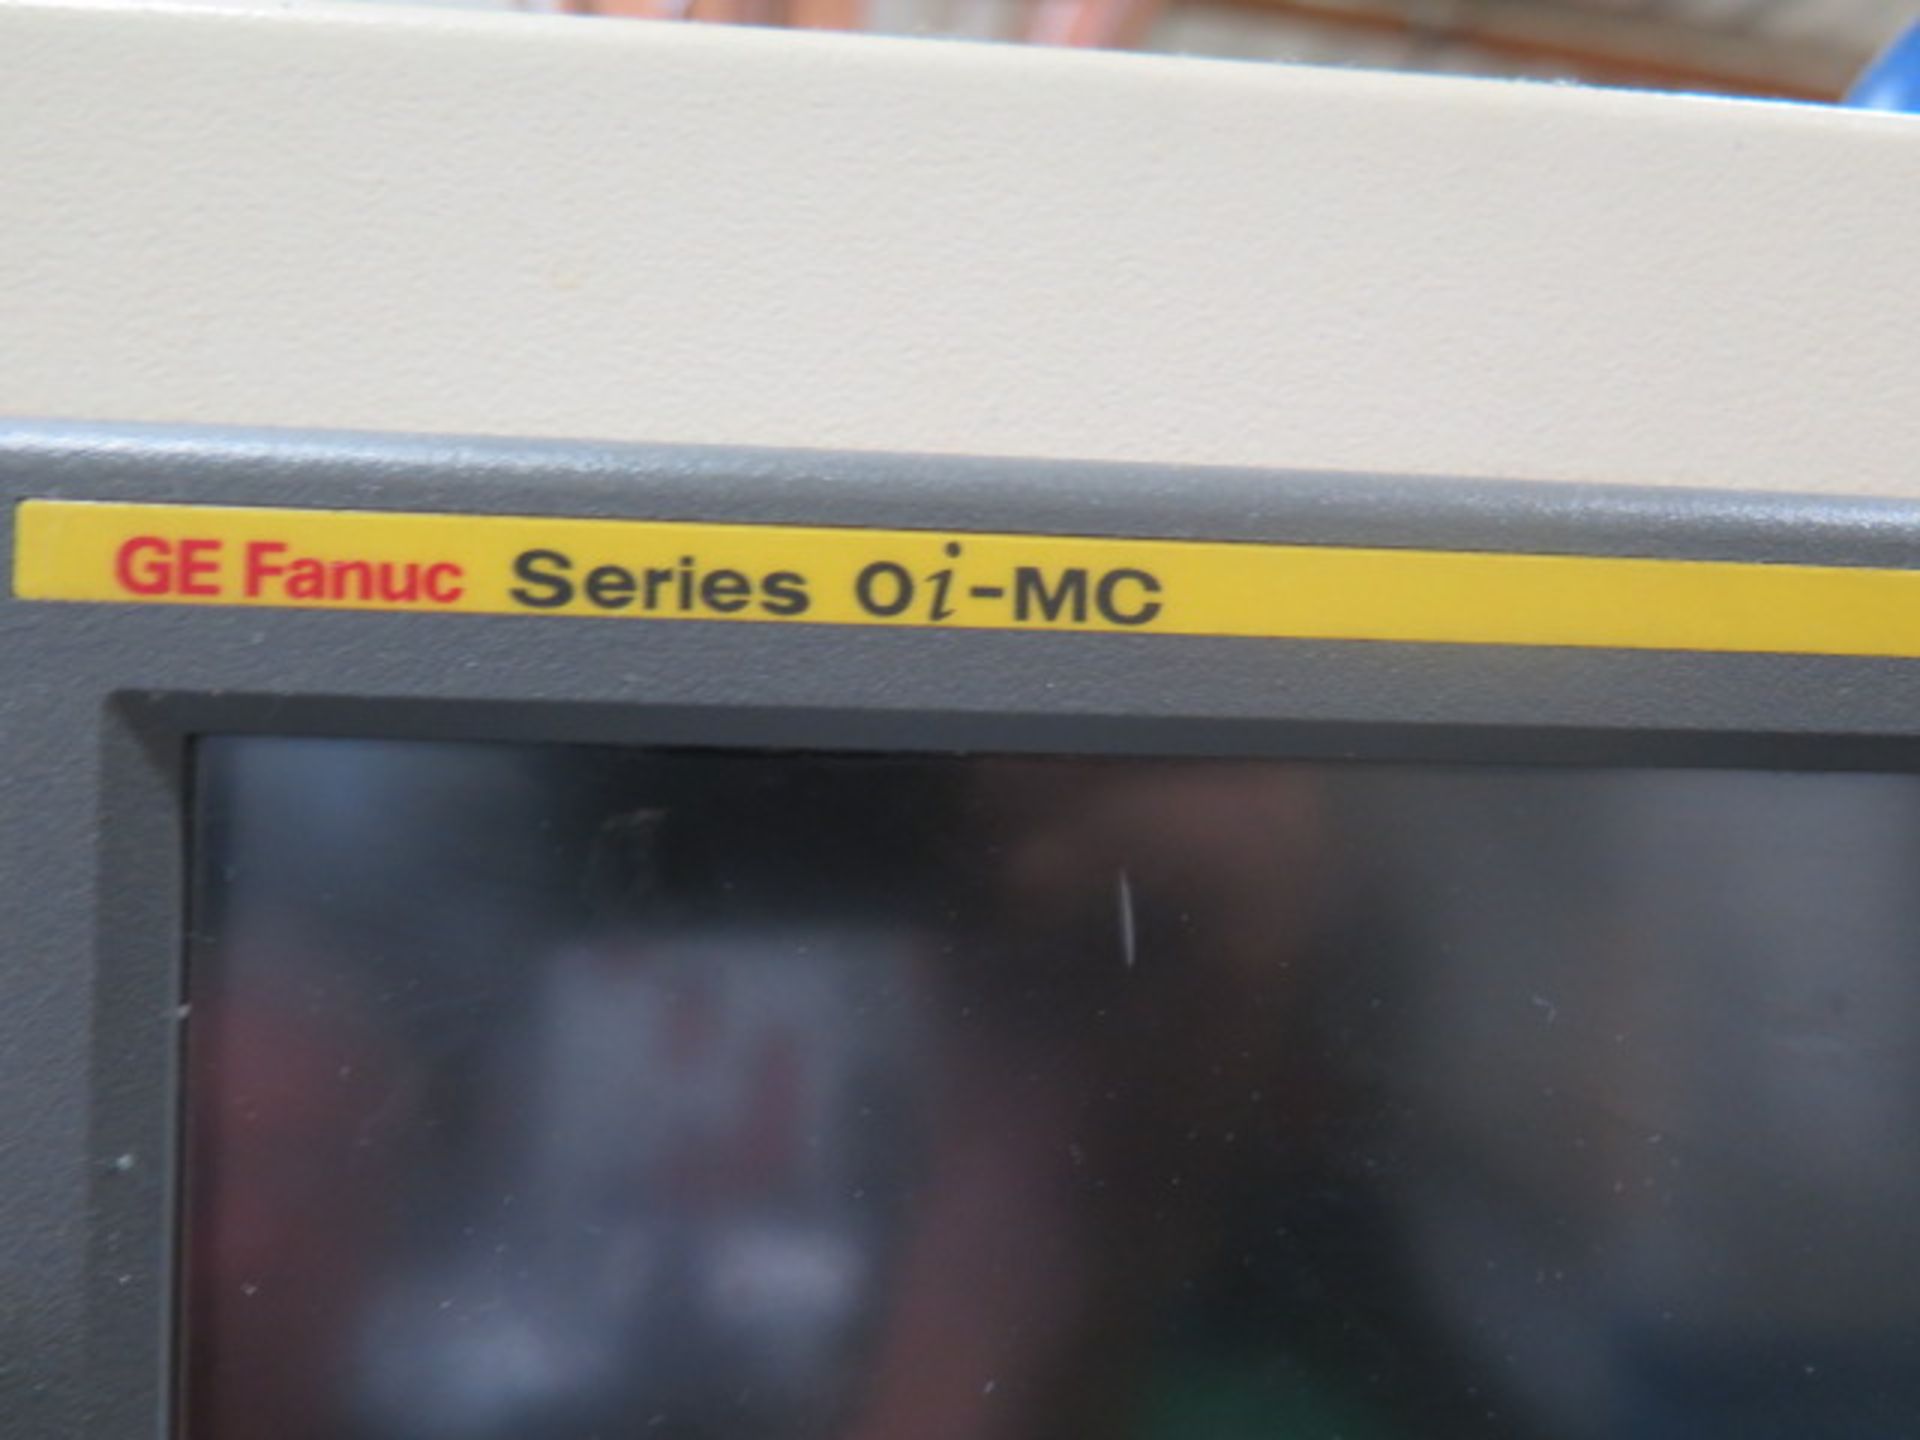 2006 Fadal VMC 2216 FX CNC VMC s/n 012006109239 w/ Fanuc Series 0i-MC, SOLD AS IS - Image 7 of 17